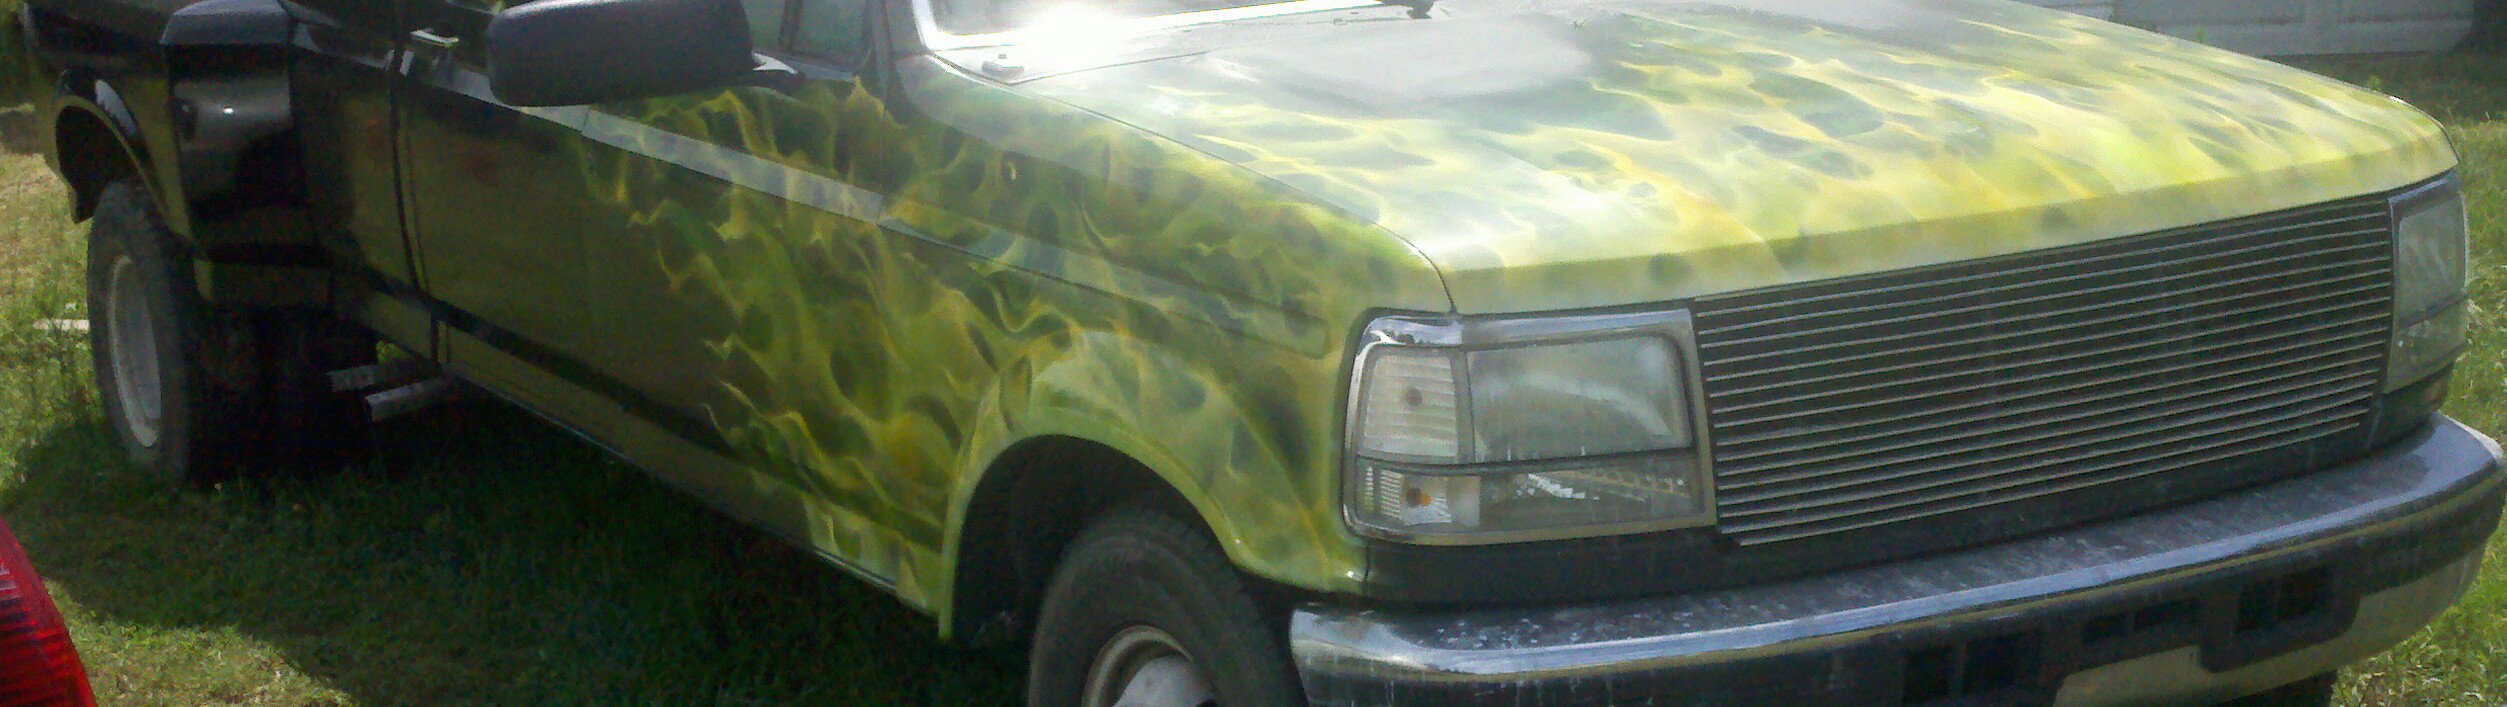 green candy pearls, yellow candy pearls, all make excellent flame paint job graphics.